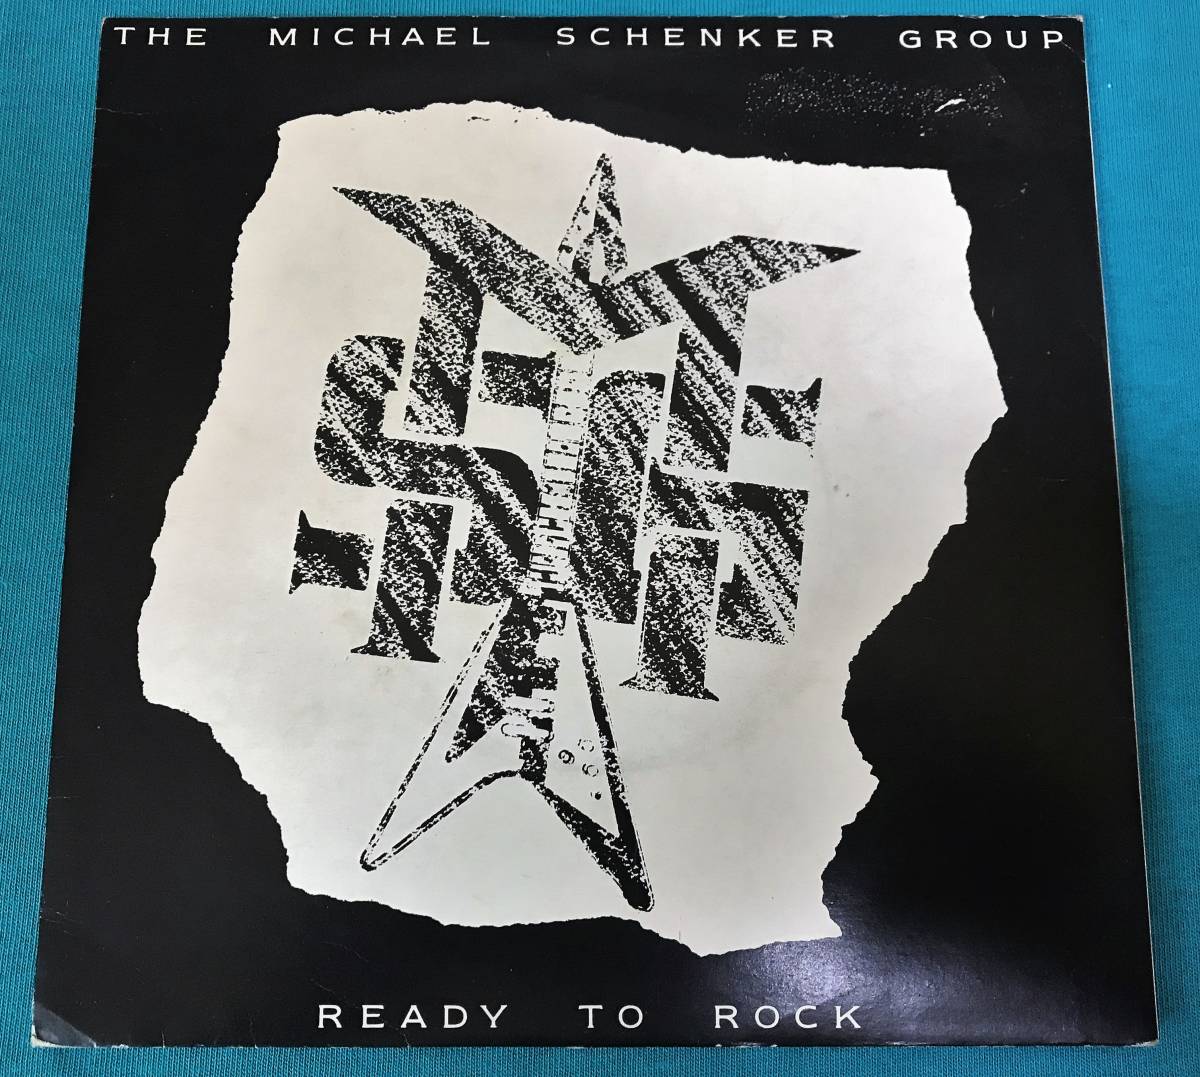 7”●The Michael Schenker Group / Ready To Rock UK盤CHS 2541　クリアーホワイト盤 カラー盤_画像1